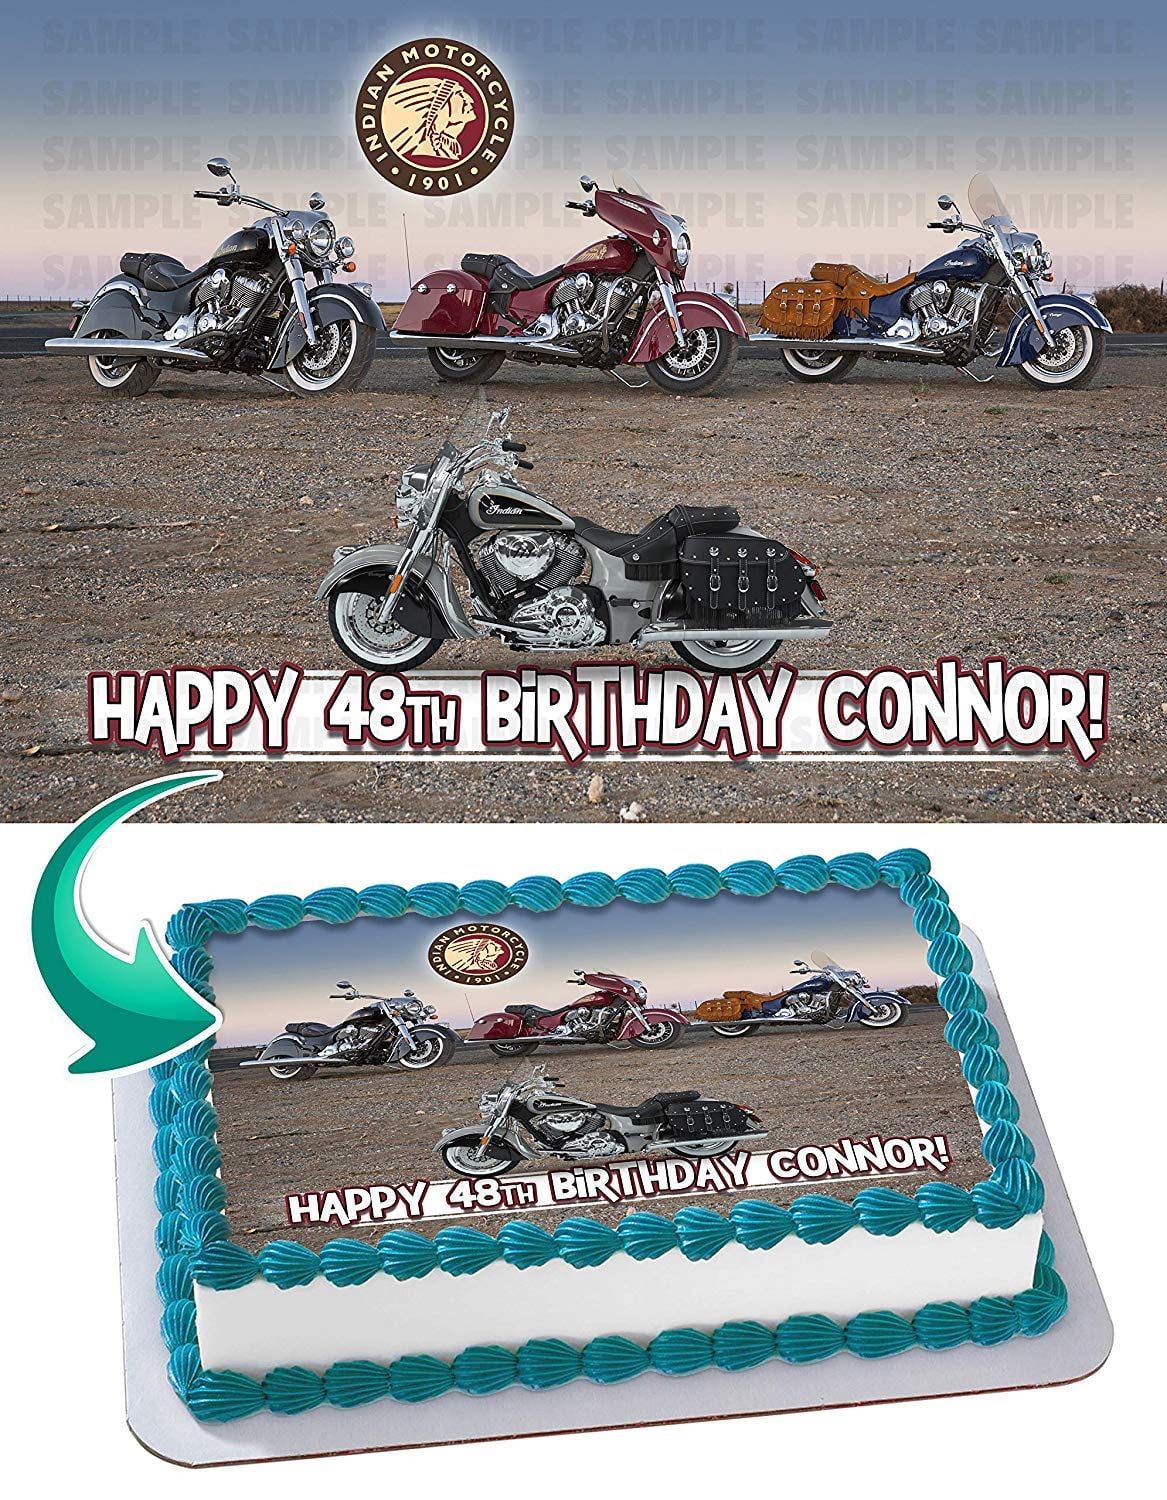 HARLEY DAVIDSON MOTORCYCLE A4 Edible Icing Birthday Cake Decoration Topper #3 